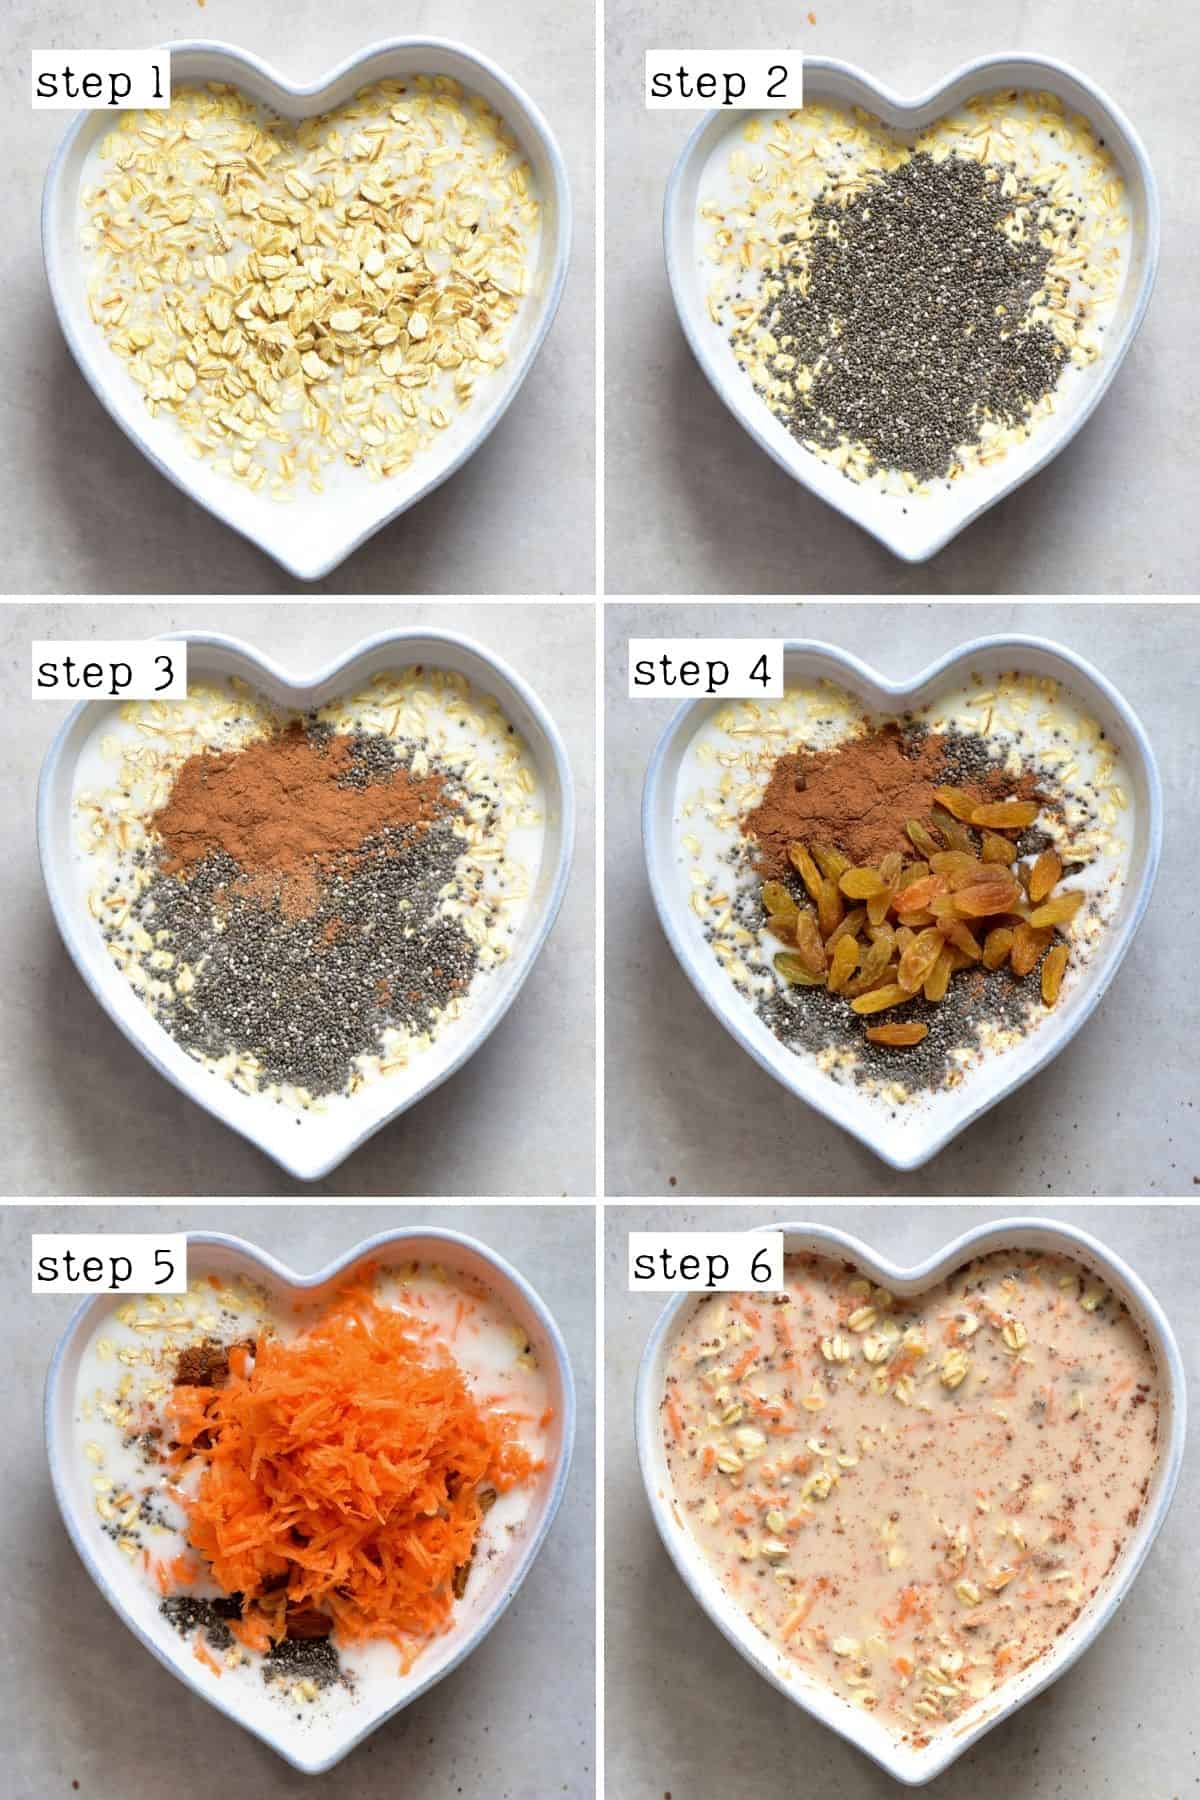 How to Make Overnight Oats (5 Flavors + FAQs) - Alphafoodie